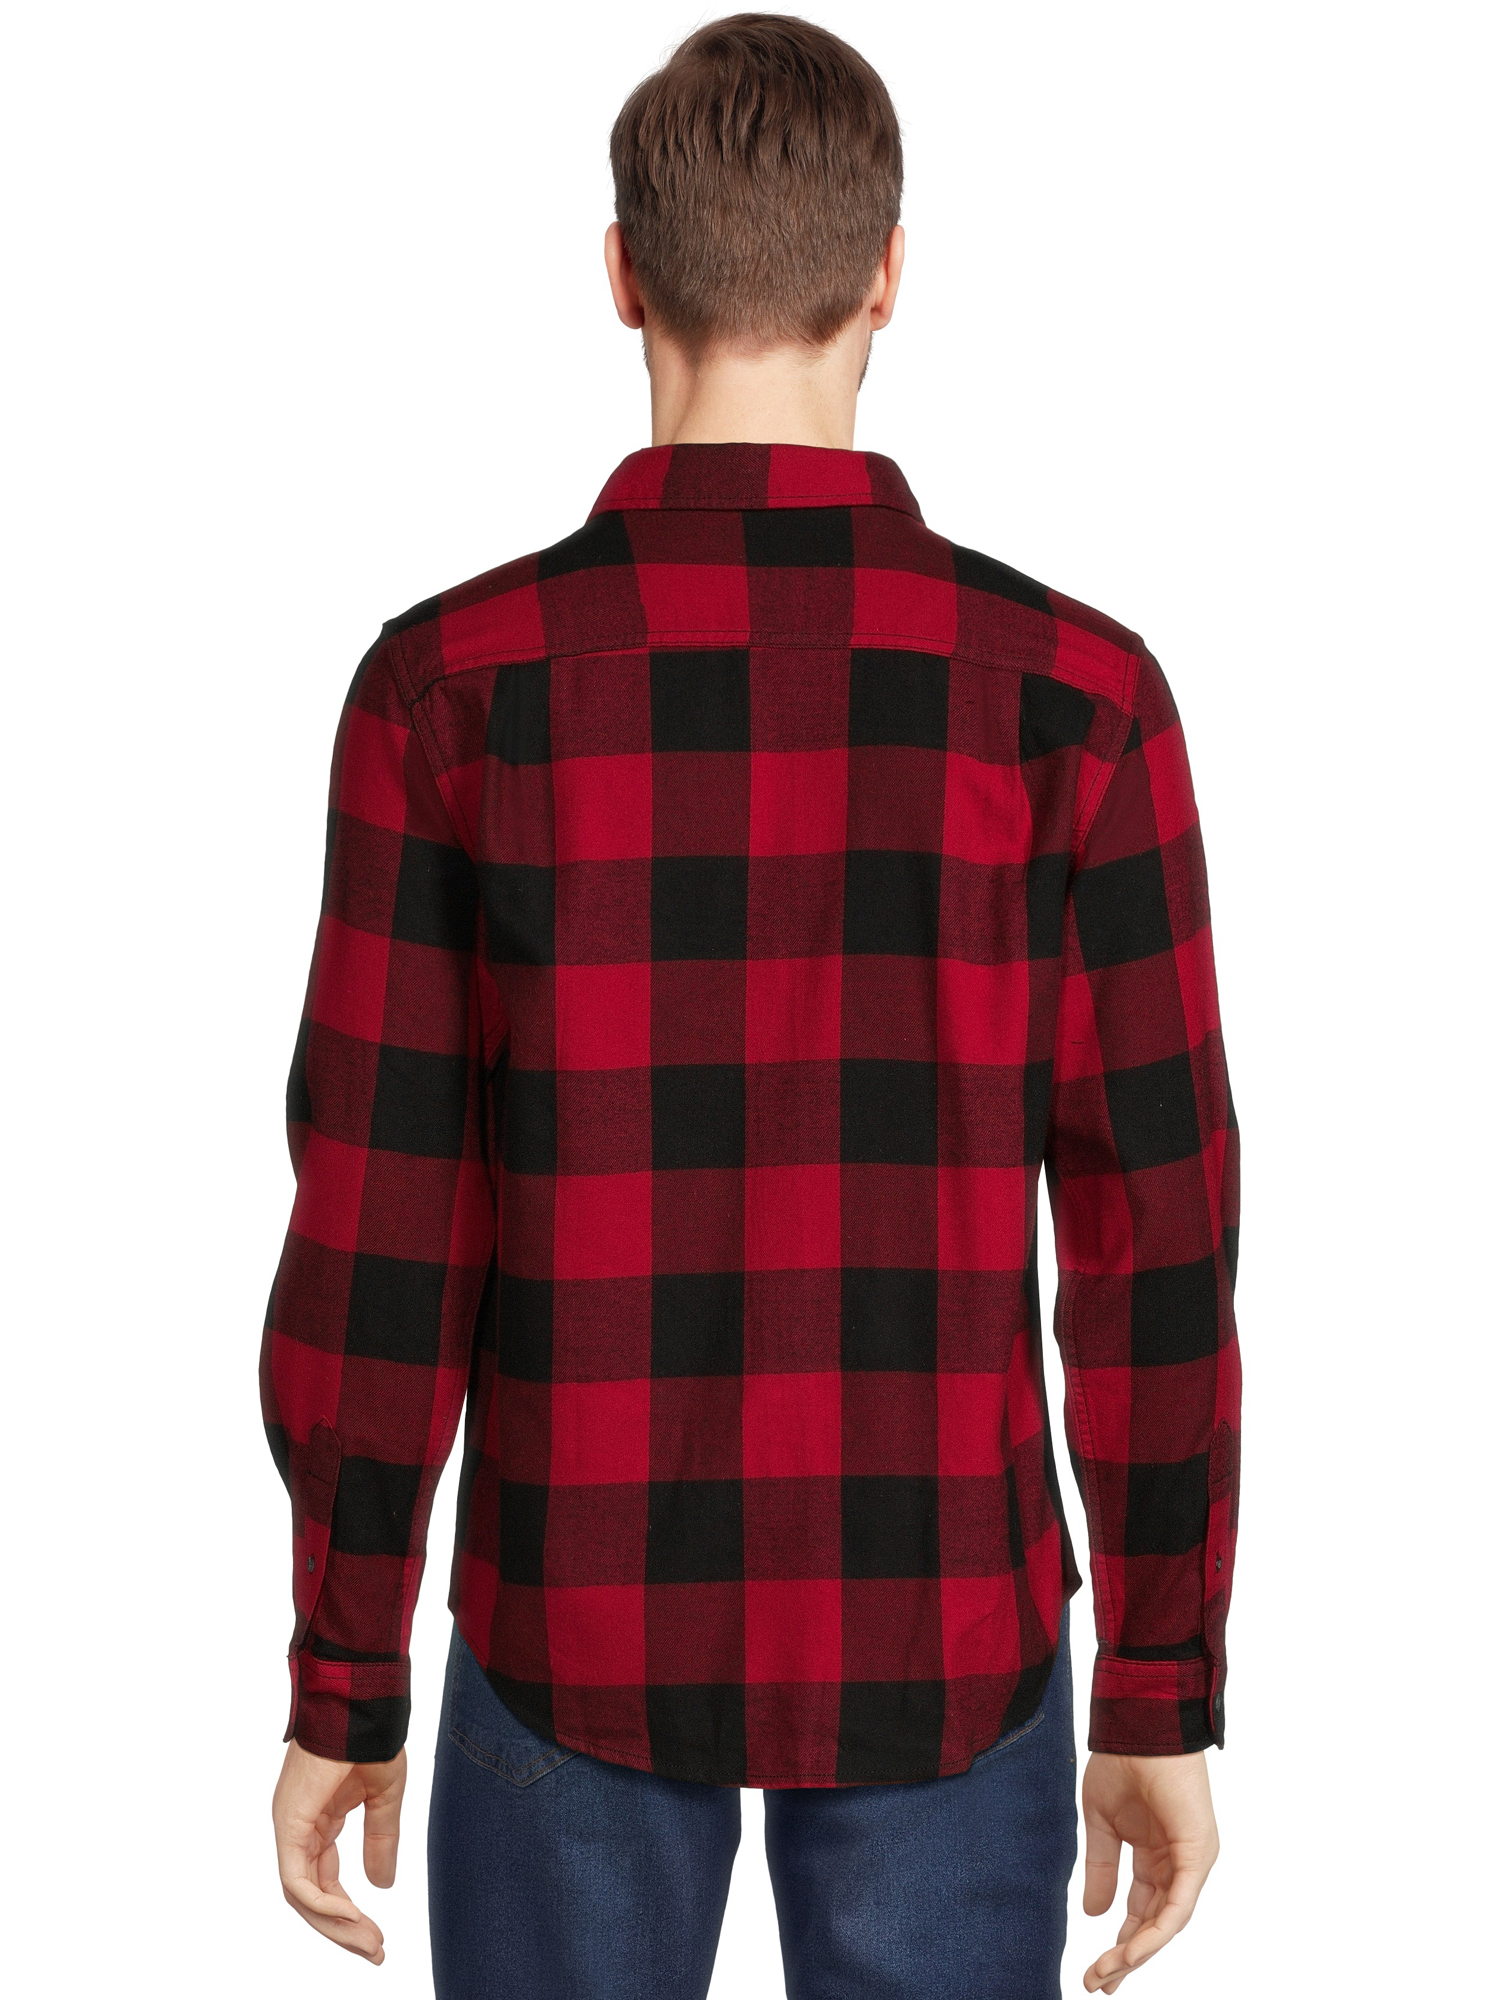 George Men's Long Sleeve Flannel Shirts, 2-Pack, Sizes S-2XL - image 5 of 5